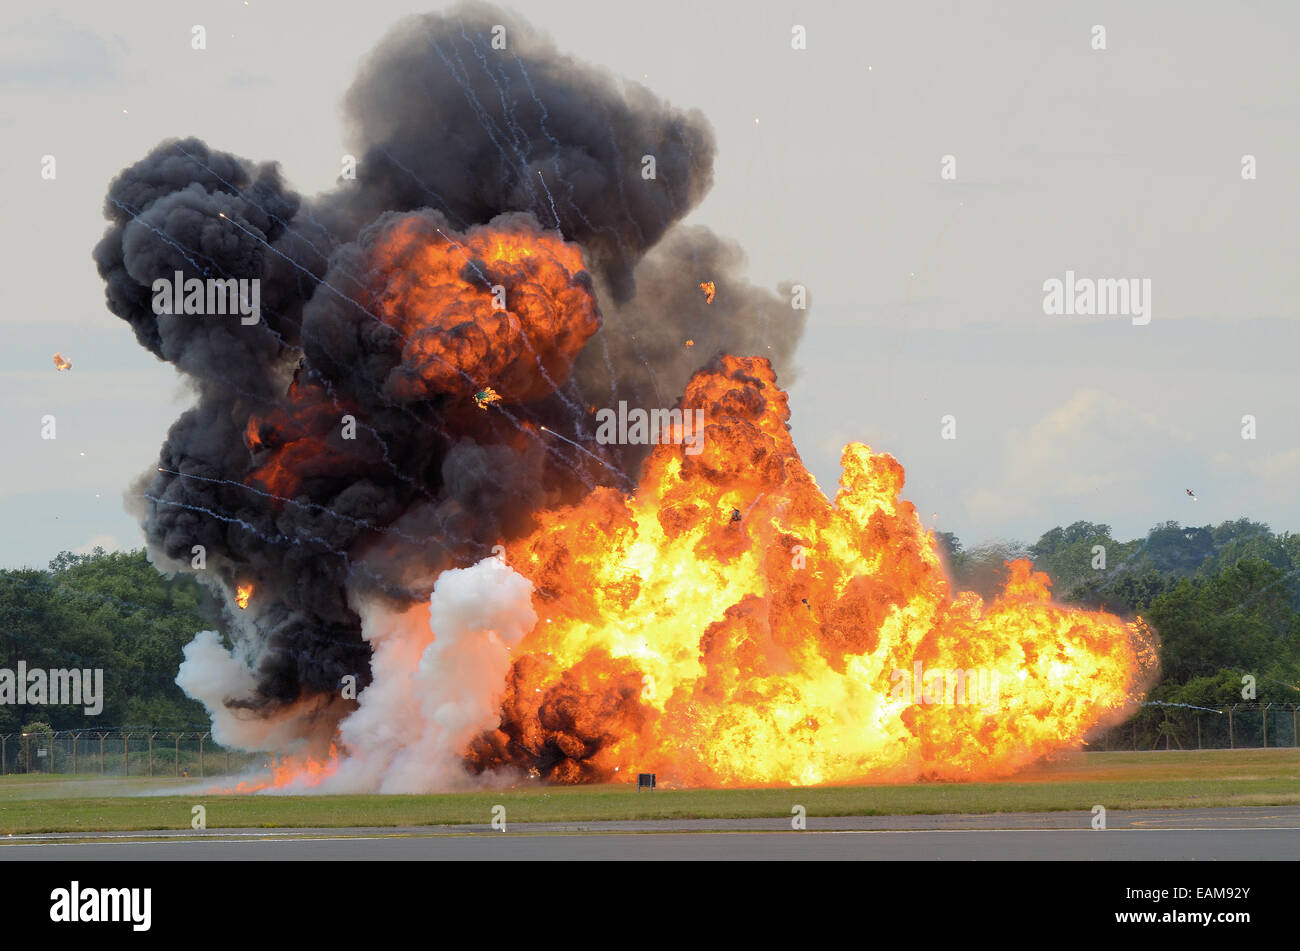 A pyrotechnic explosion on an airfield designed to illustrate a bomb attack. Fire and black smoke from ignition Stock Photo